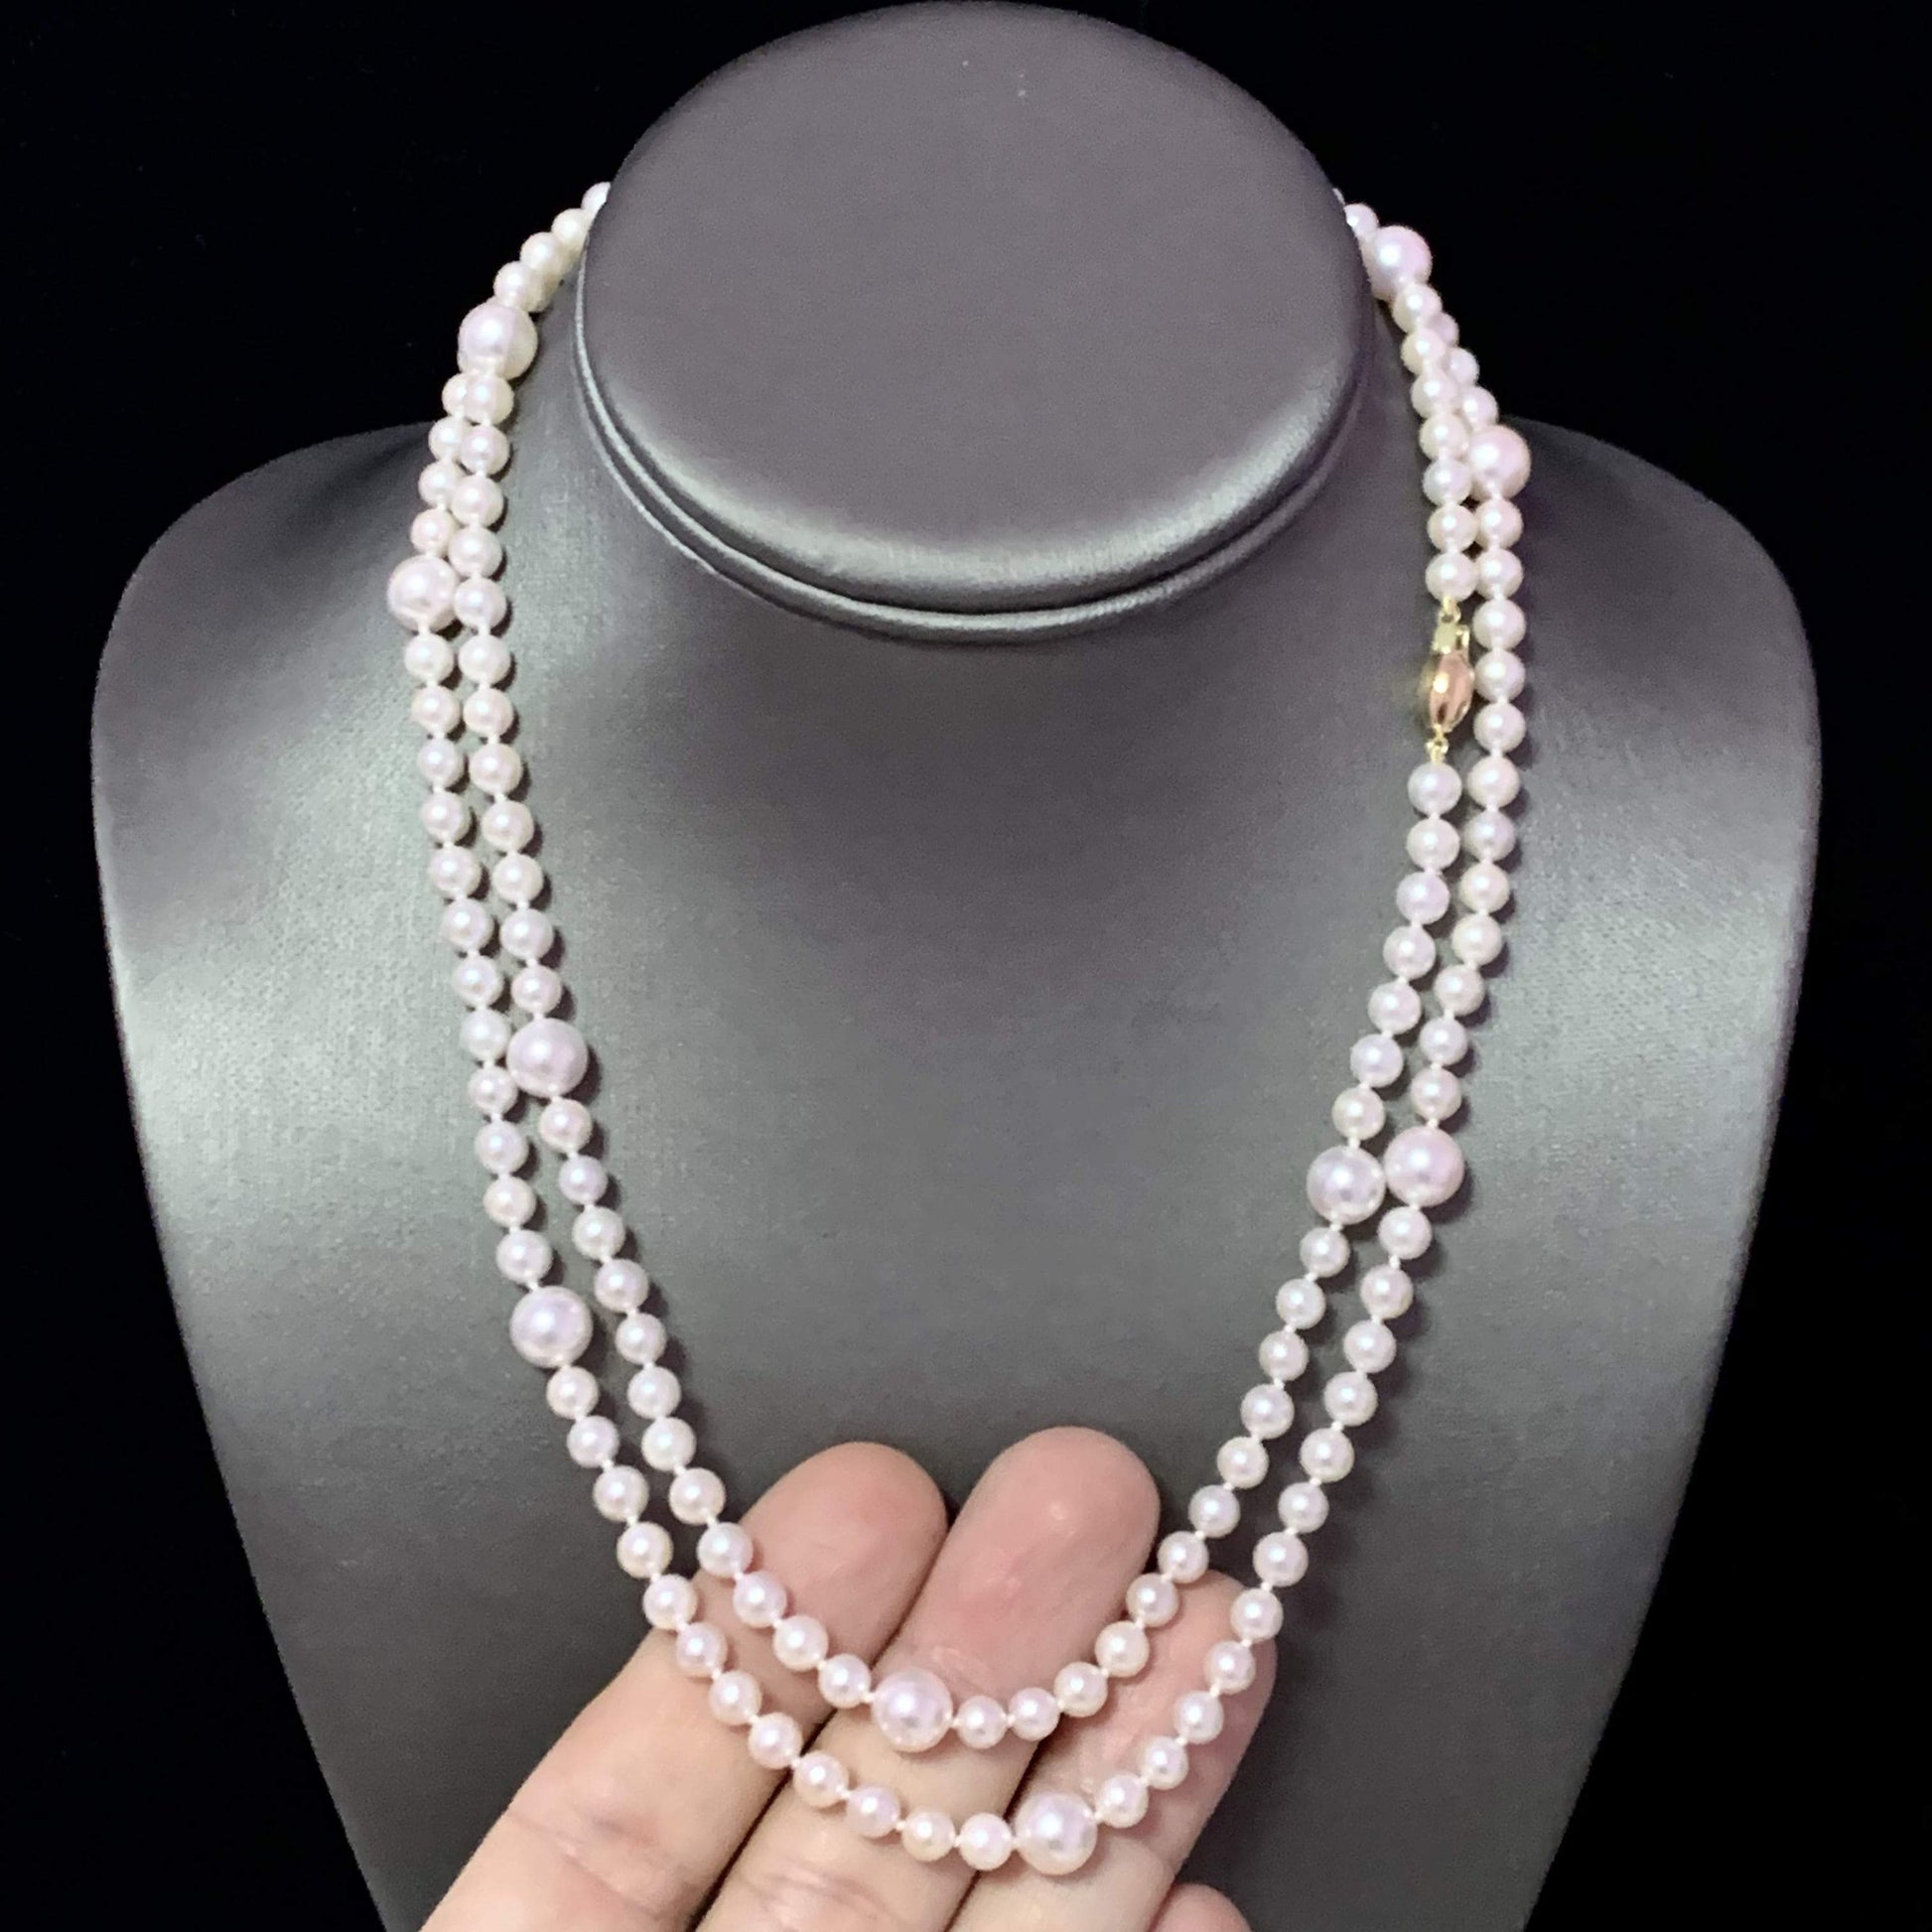 Akoya Pearl Necklace 14k Yellow Gold 37.25" 8.5 mm Certified $5,950 114457 - Certified Estate Jewelry